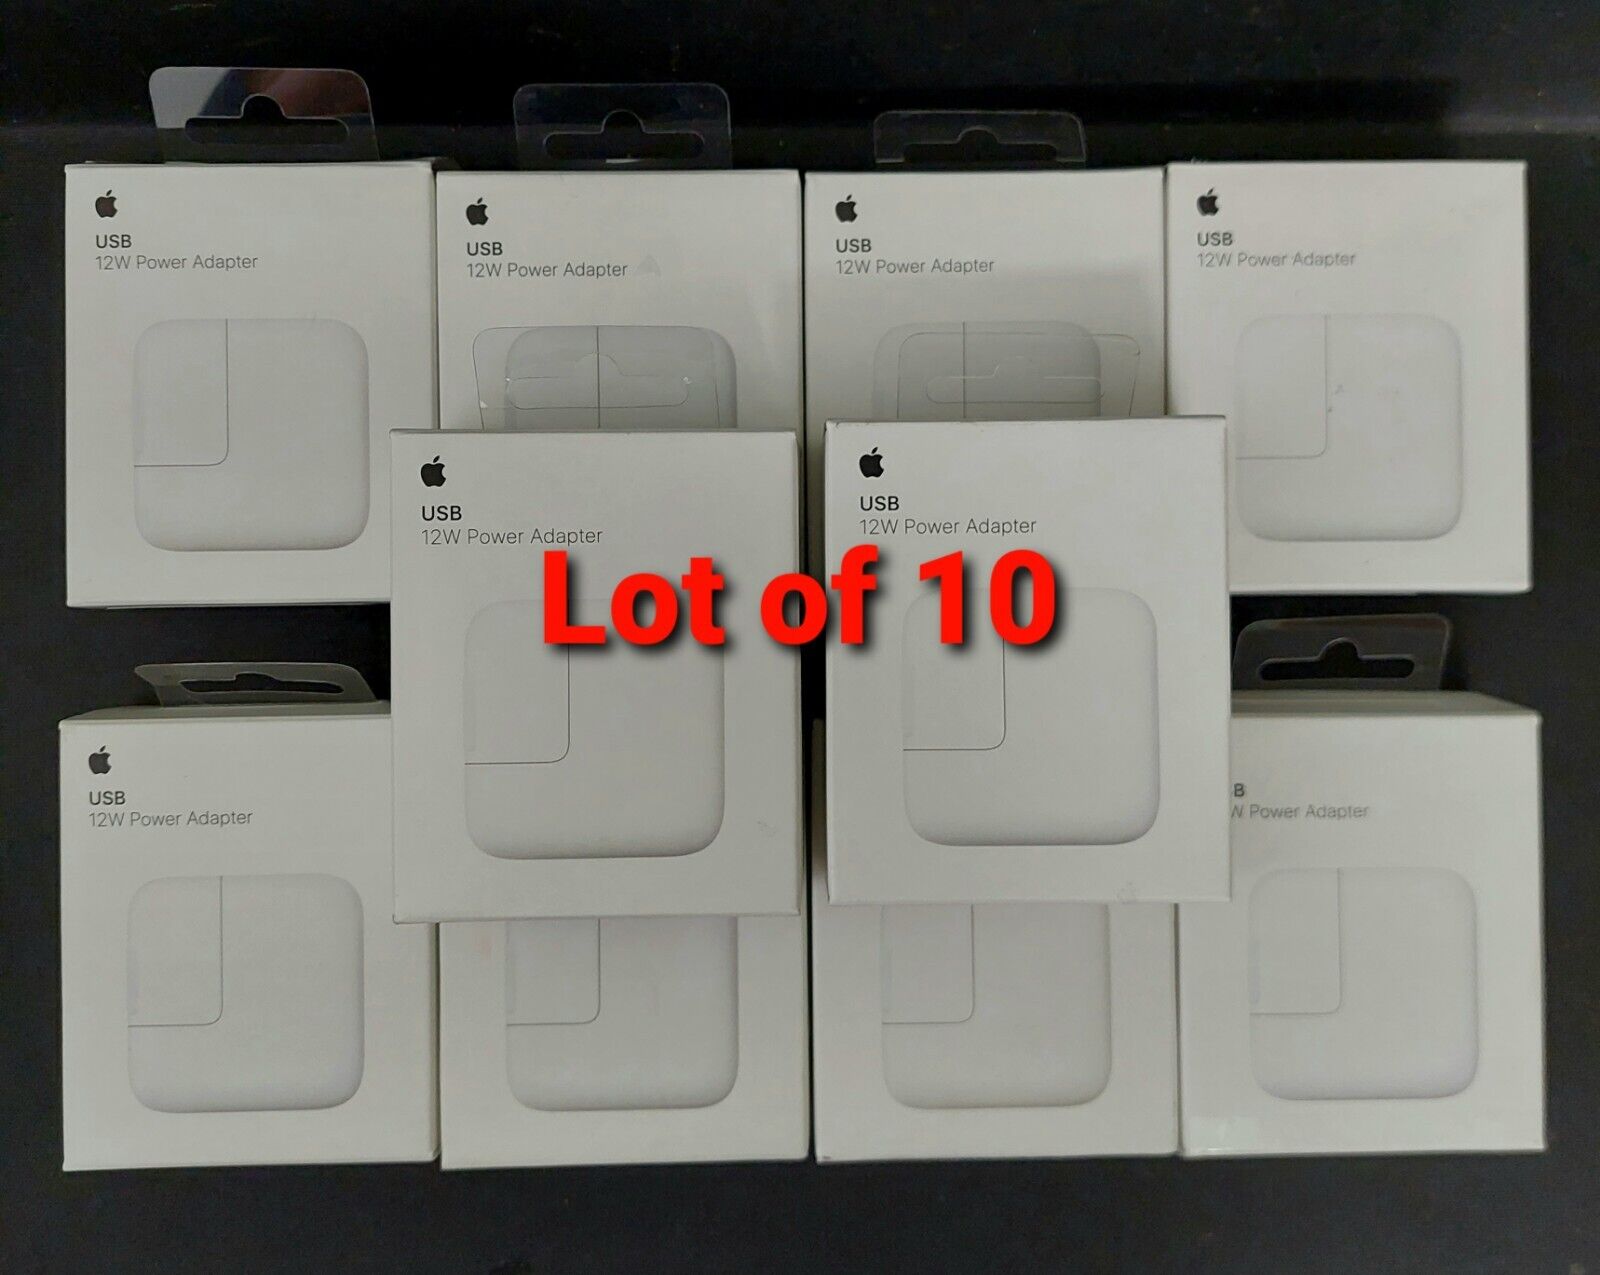  Genuine Original Apple iPad 12W USB Power Adapter Charger (A1401) Lot of 10